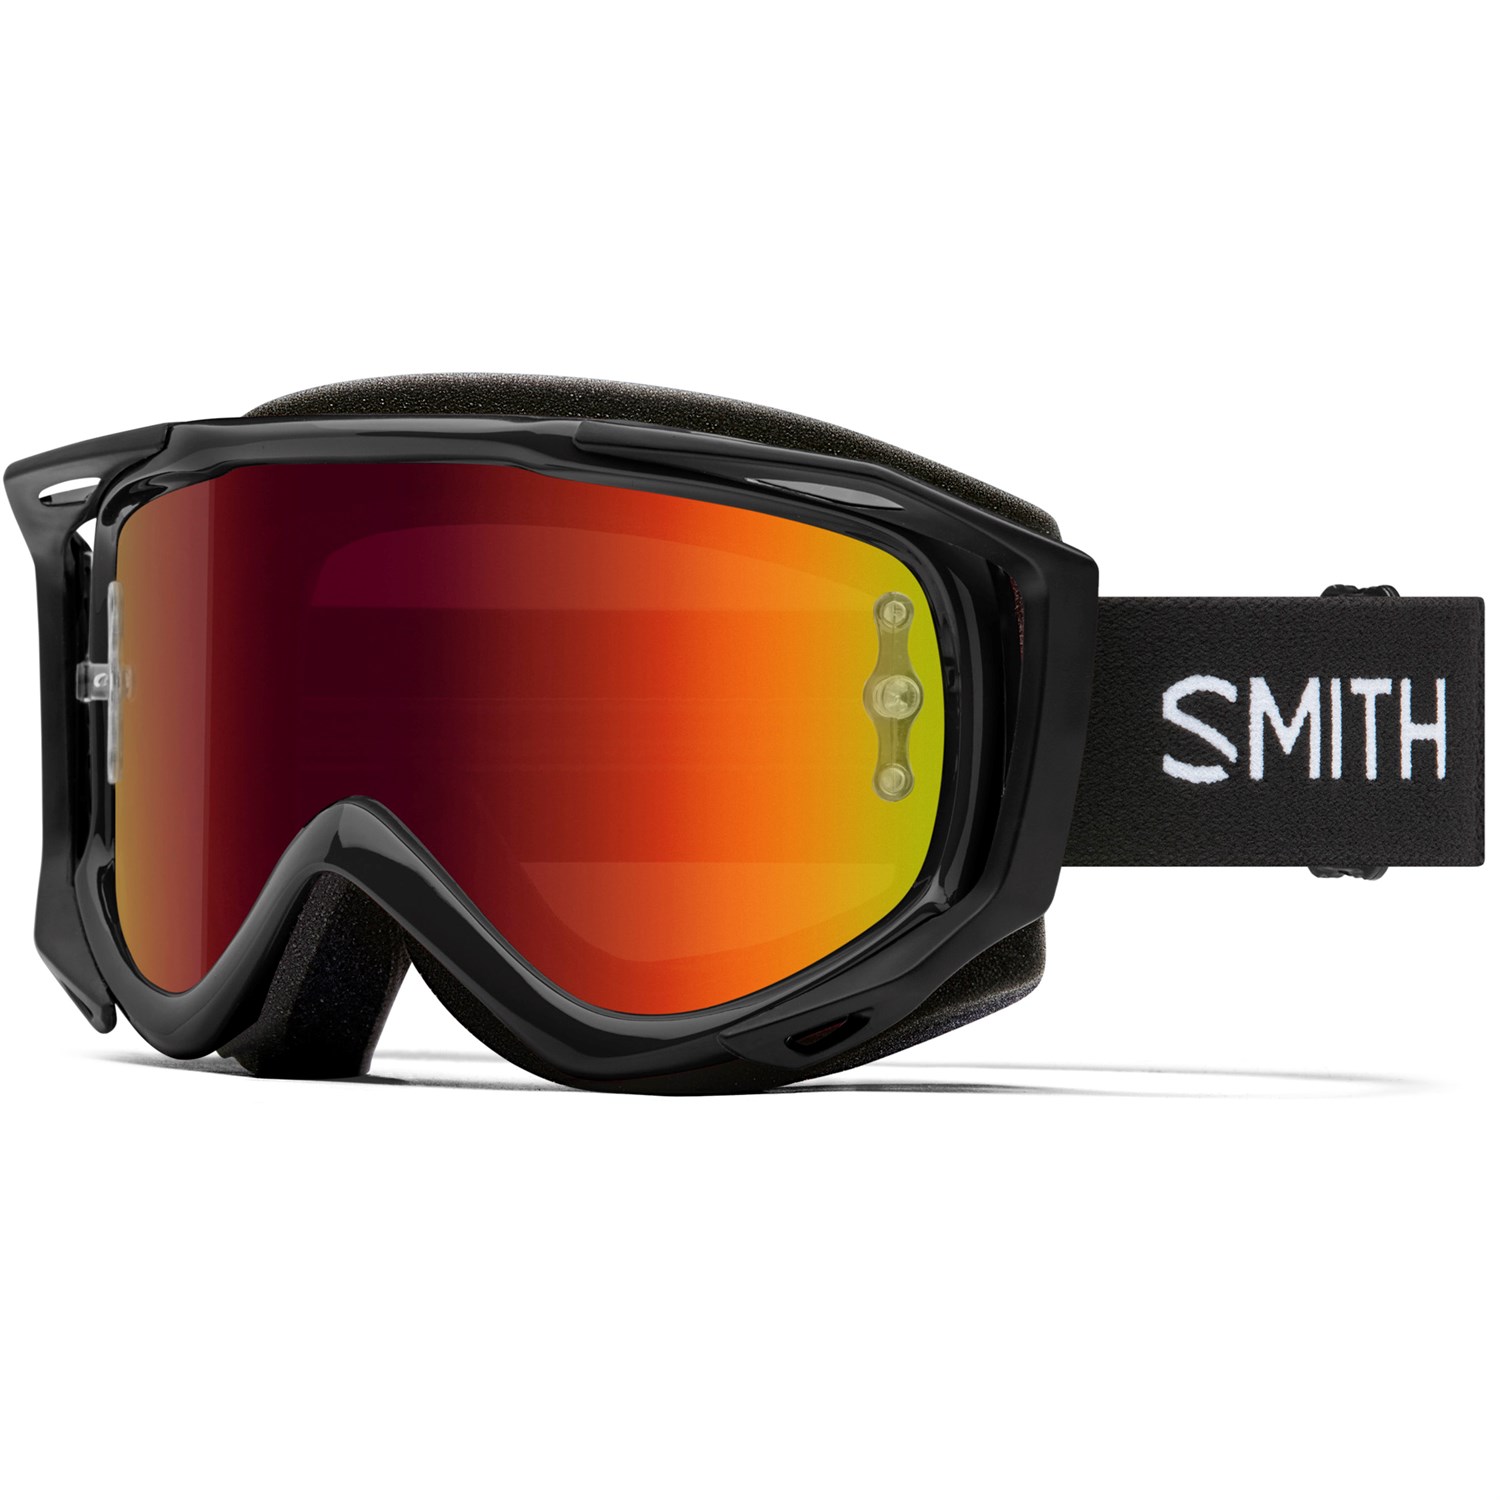 Smith Fuel and Intake Clear Goggle Lens Motocross 